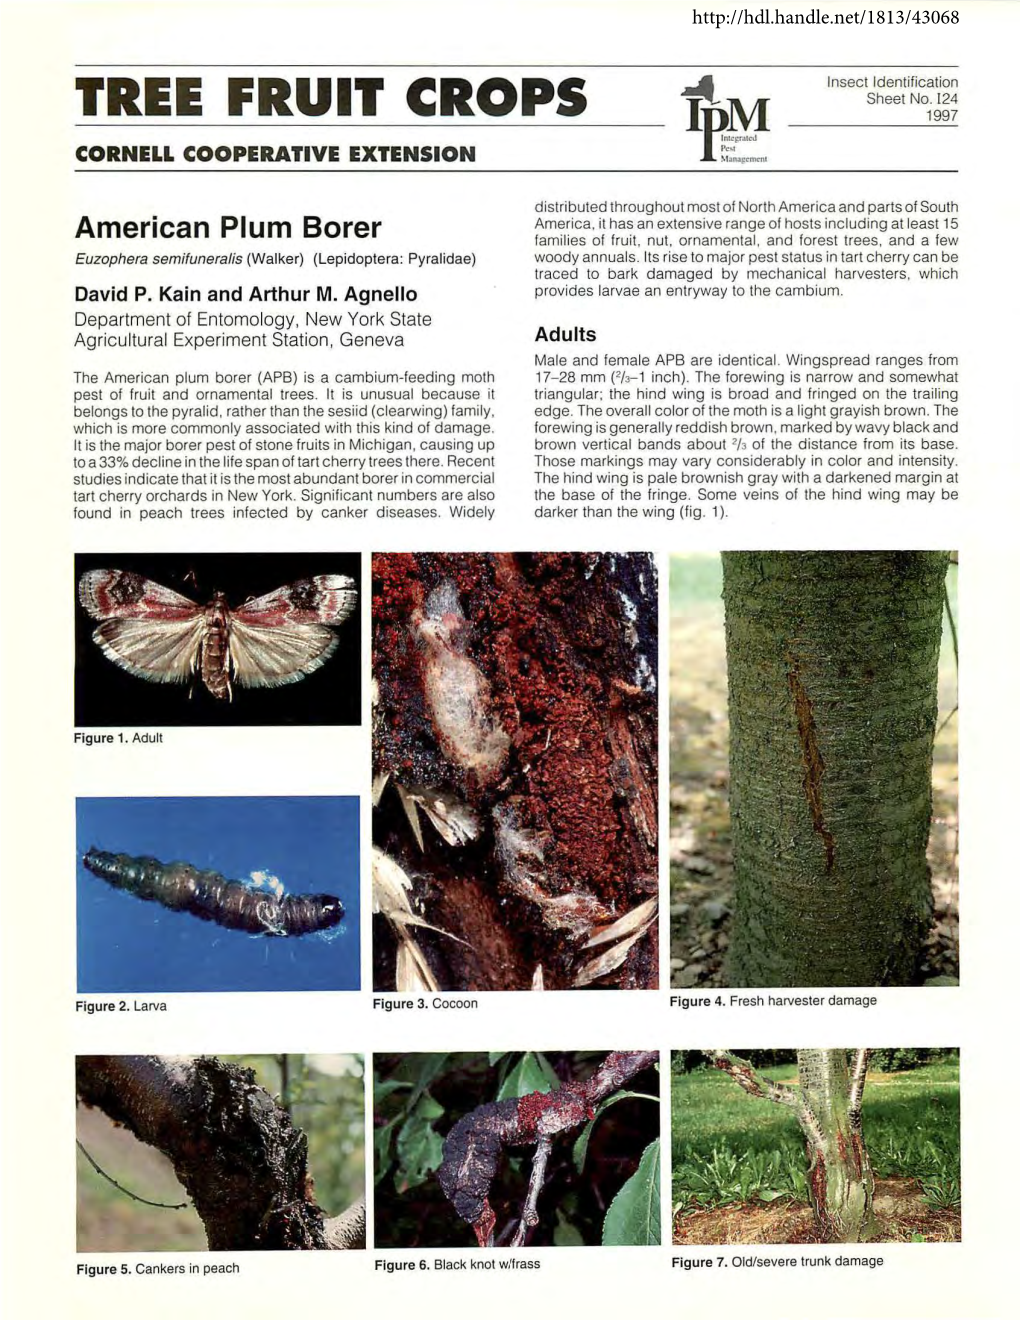 American Plum Borer Families of Fruit, Nut, Ornamental, and Forest Trees, and a Few Euzophera Semifuneralis (Walker) (Lepidoptera: Pyralidae) Woody Annuals